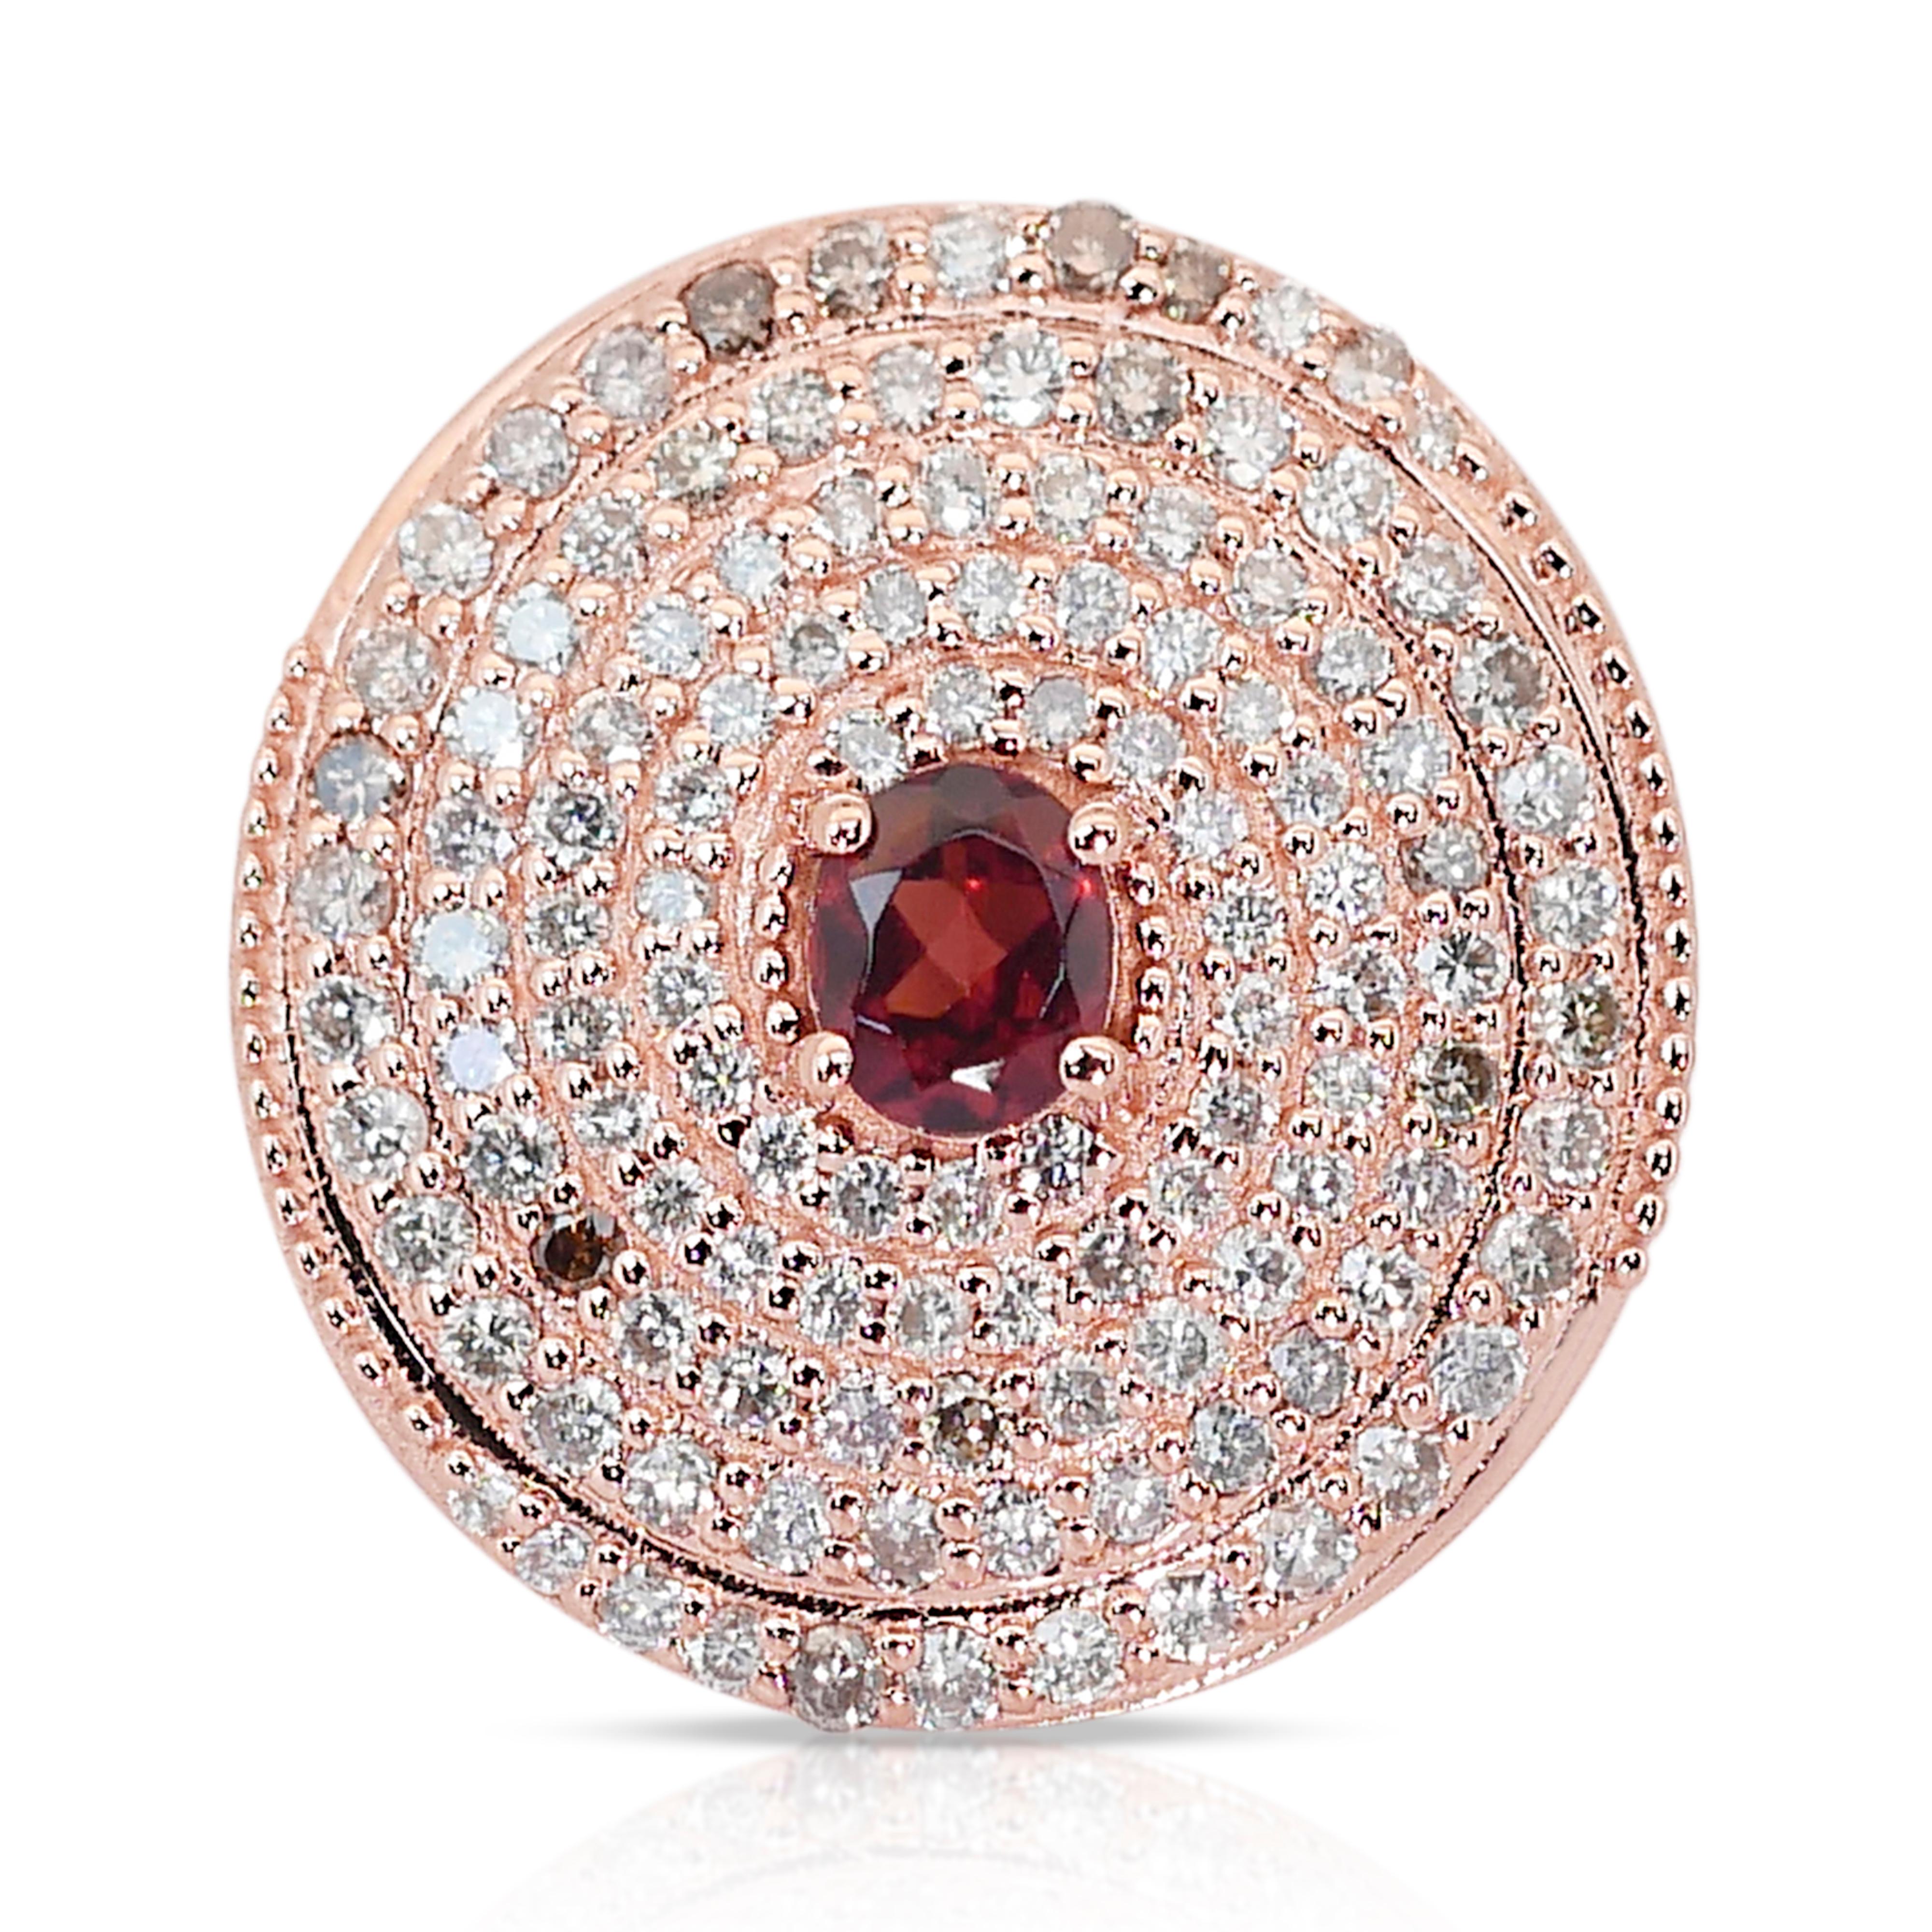 Dazzling 14k Rose Gold Garnet and Diamond Halo Ring w/2.11 ct - IGI Certified

This captivating ring features a stunning 0.51 carat, oval-shaped brownish red garnet as its centerpiece. The rich gemstone is beautifully complemented by a halo of 120